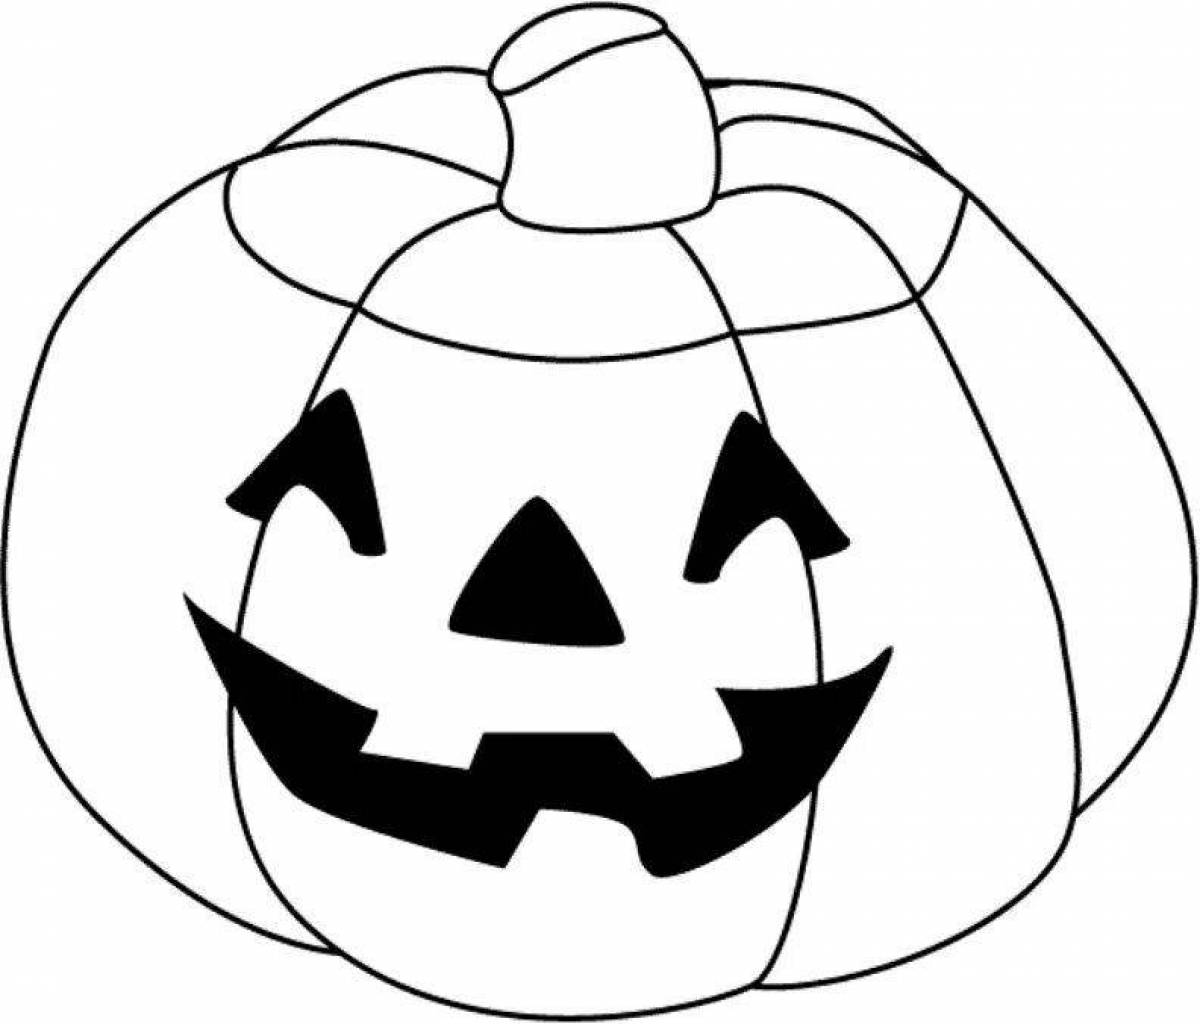 Sinister halloween pumpkin coloring page